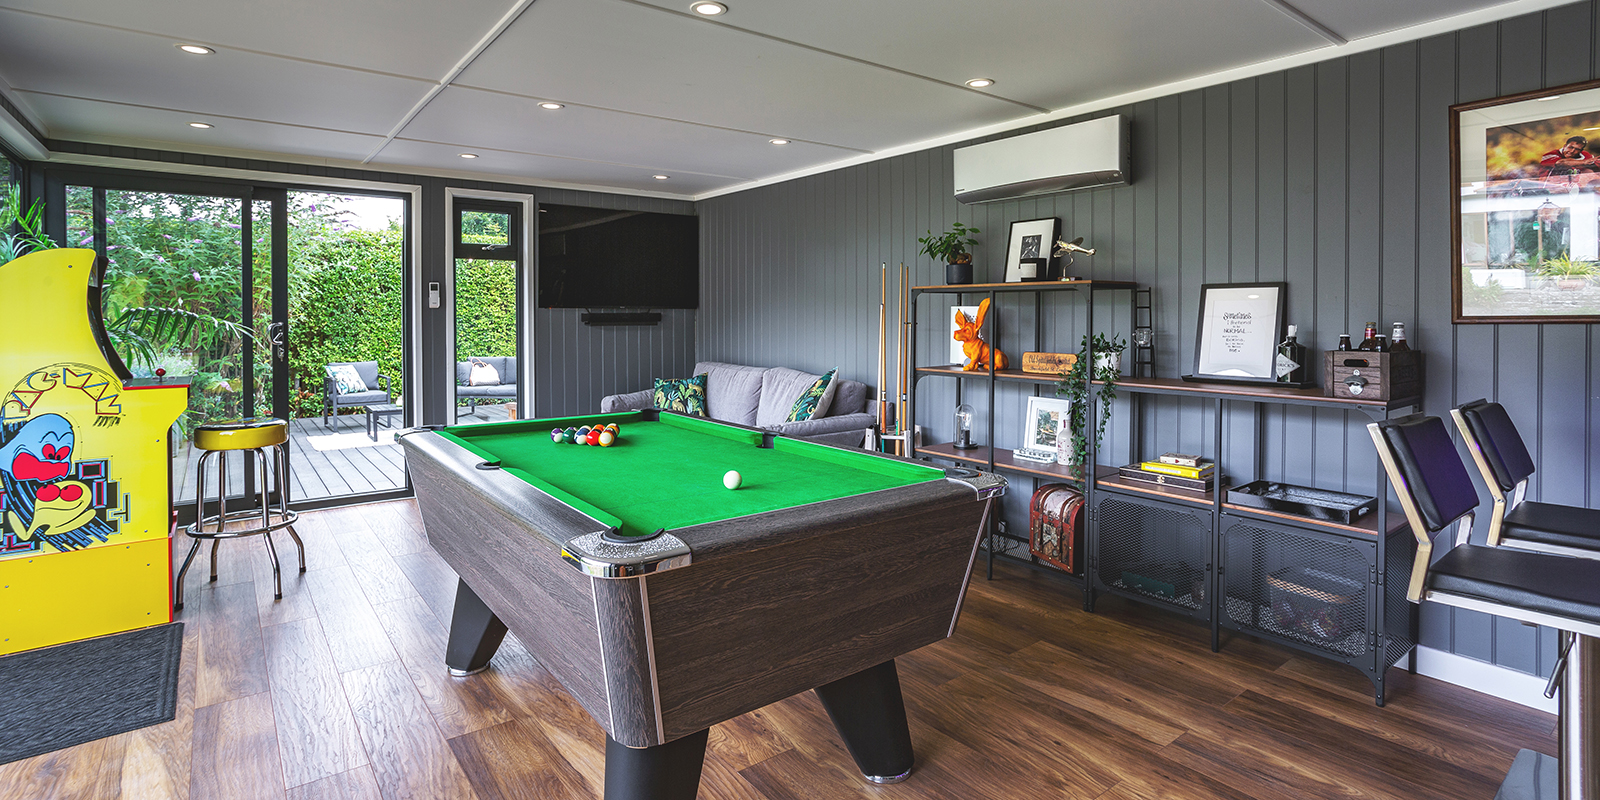 Interior of a garden bar games room for entertaining, with pool table and seating 